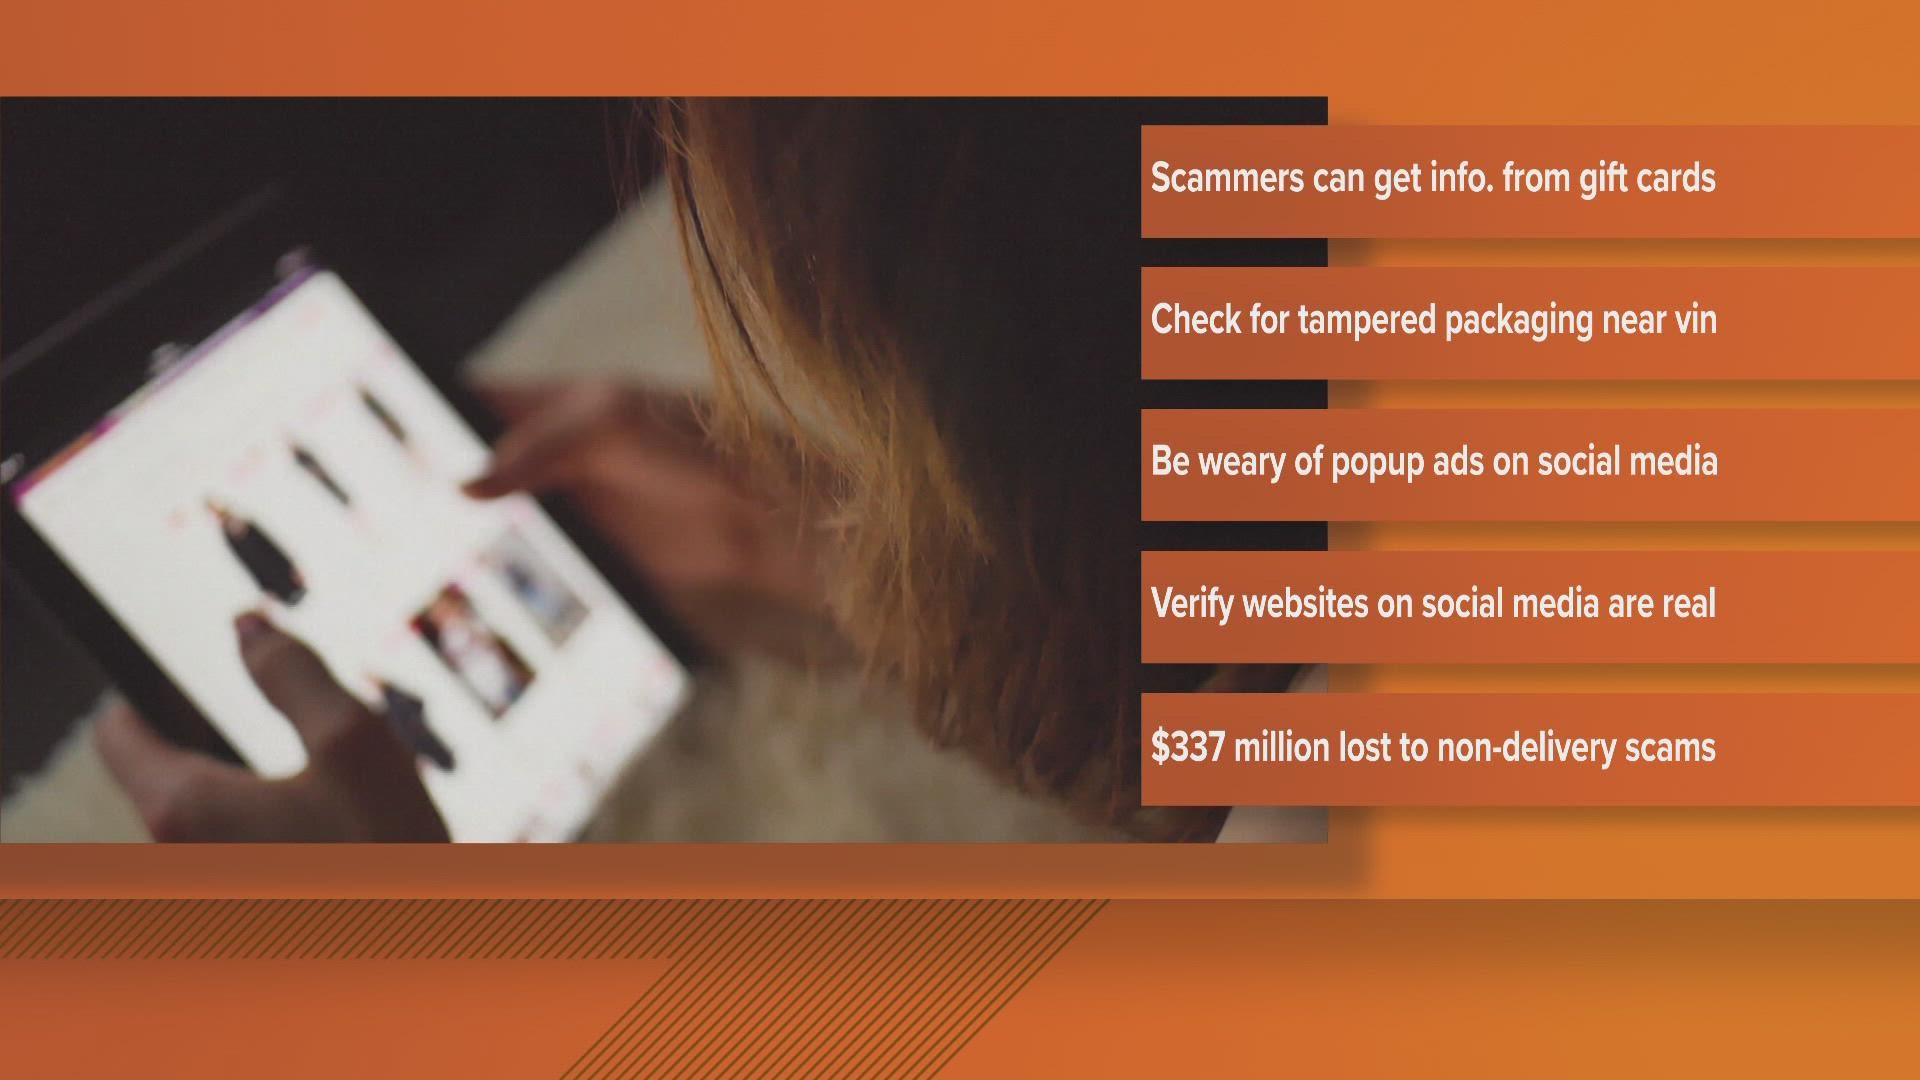 The FBI says Americans lost over $337 million to non-payment or non-delivery scams in 2021.